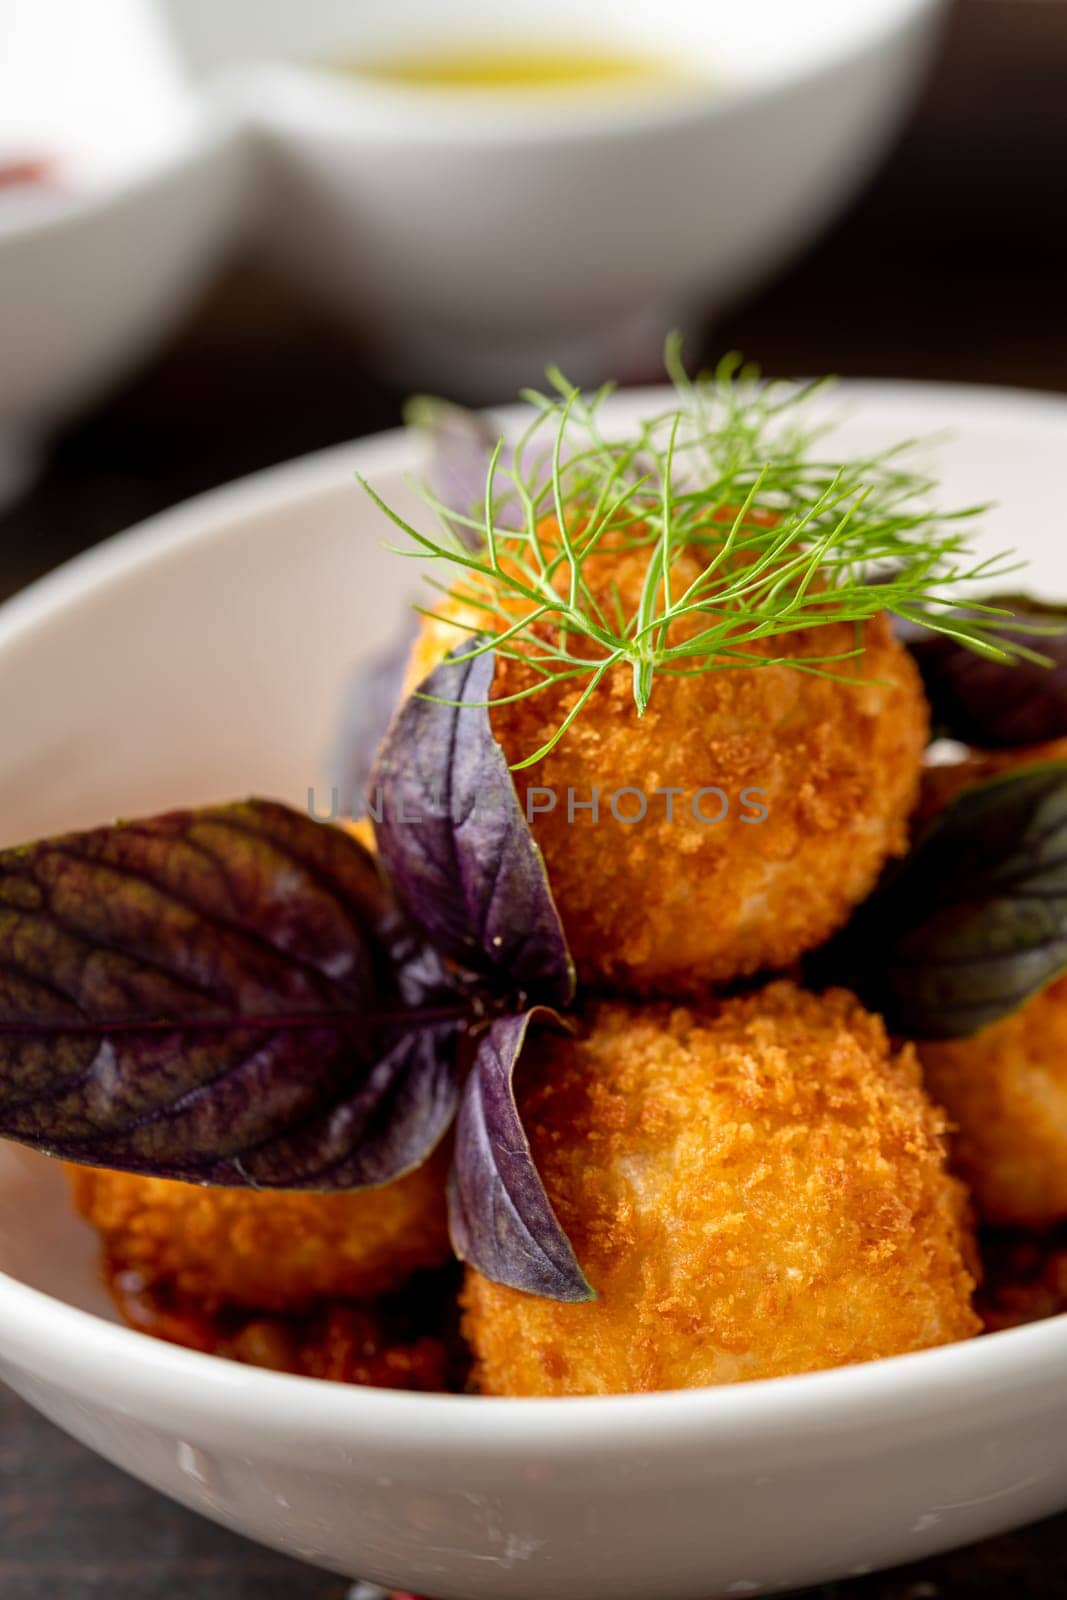 Homemade Fried Sicilian Arancini stuffed with meat, with tomato sauce by Sonat